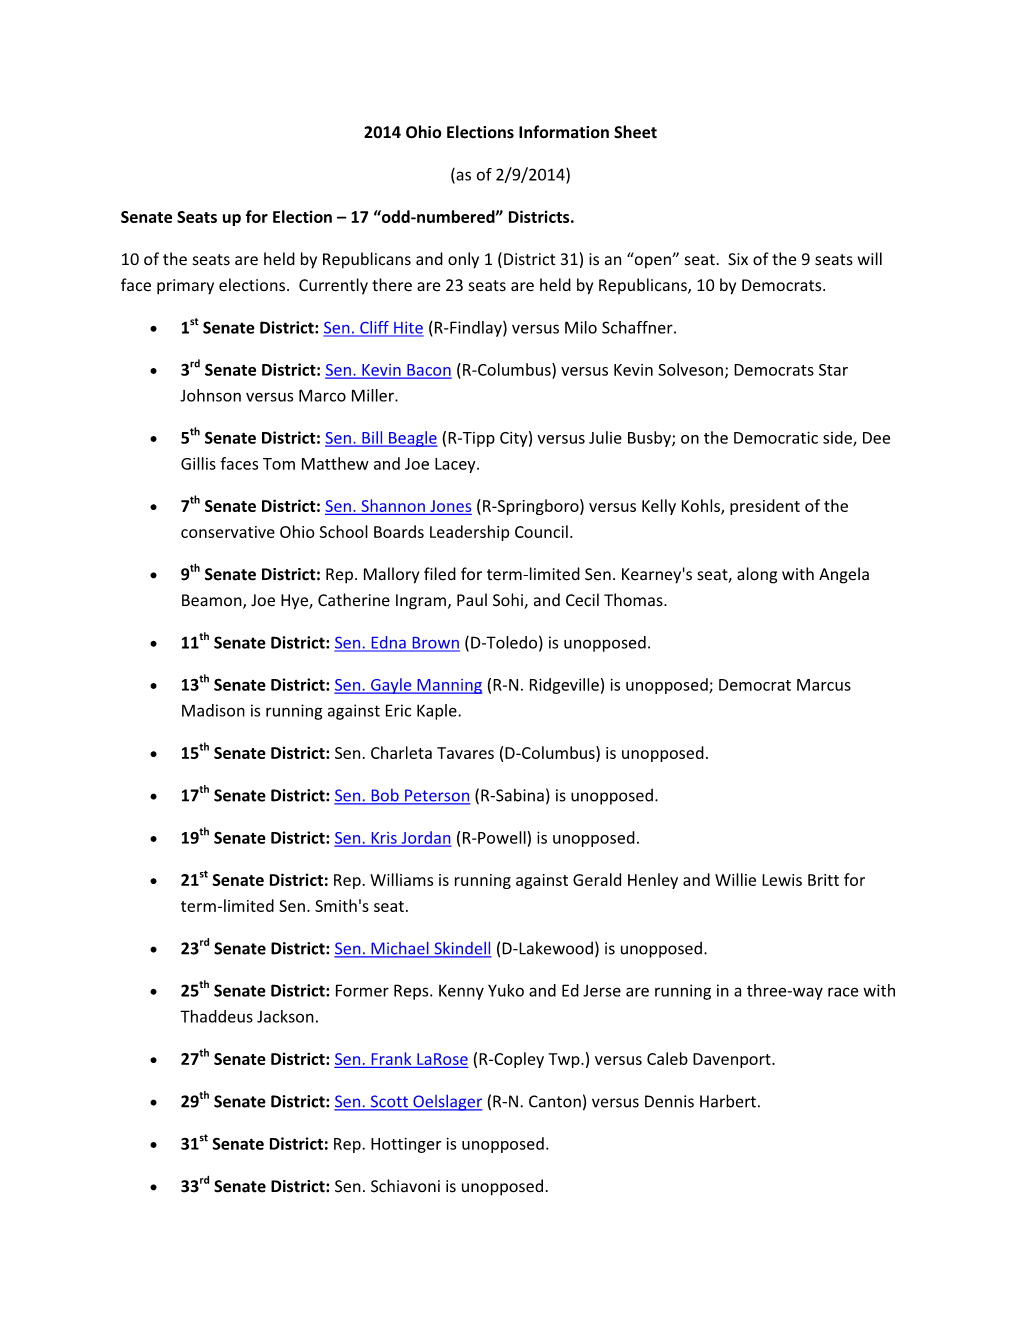 2014 Ohio Elections Information Sheet (As of 2/9/2014) Senate Seats Up